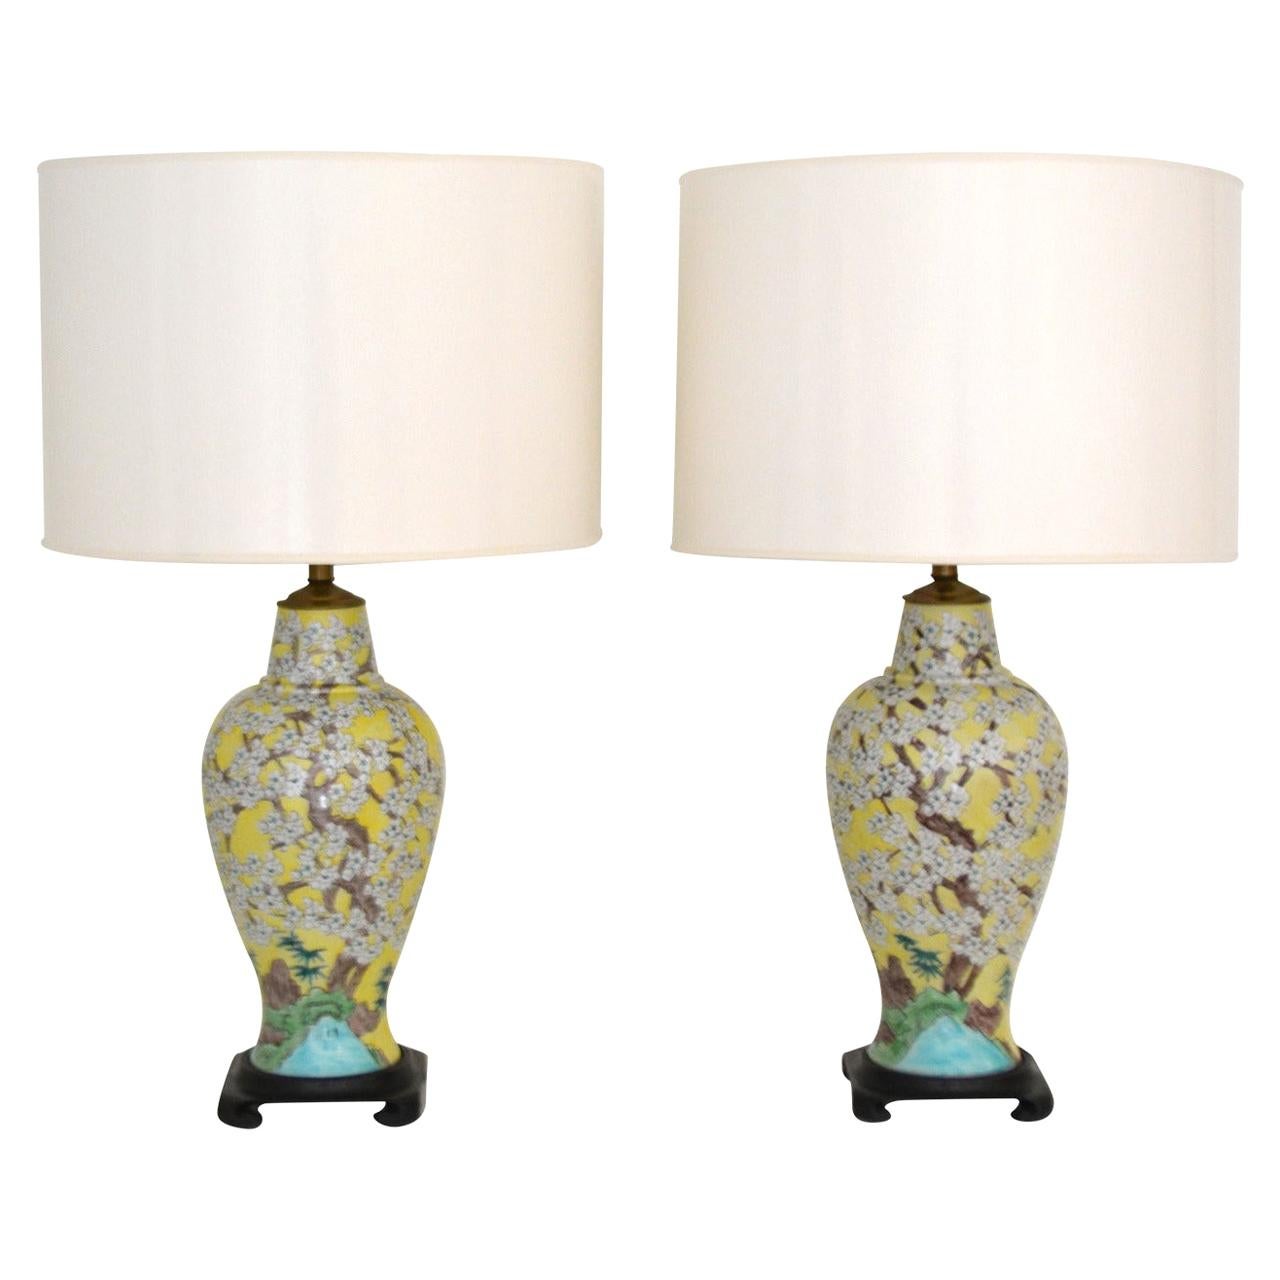 Pair of Asian Inspired Polychrome Porcelain Table Lamps im Angebot